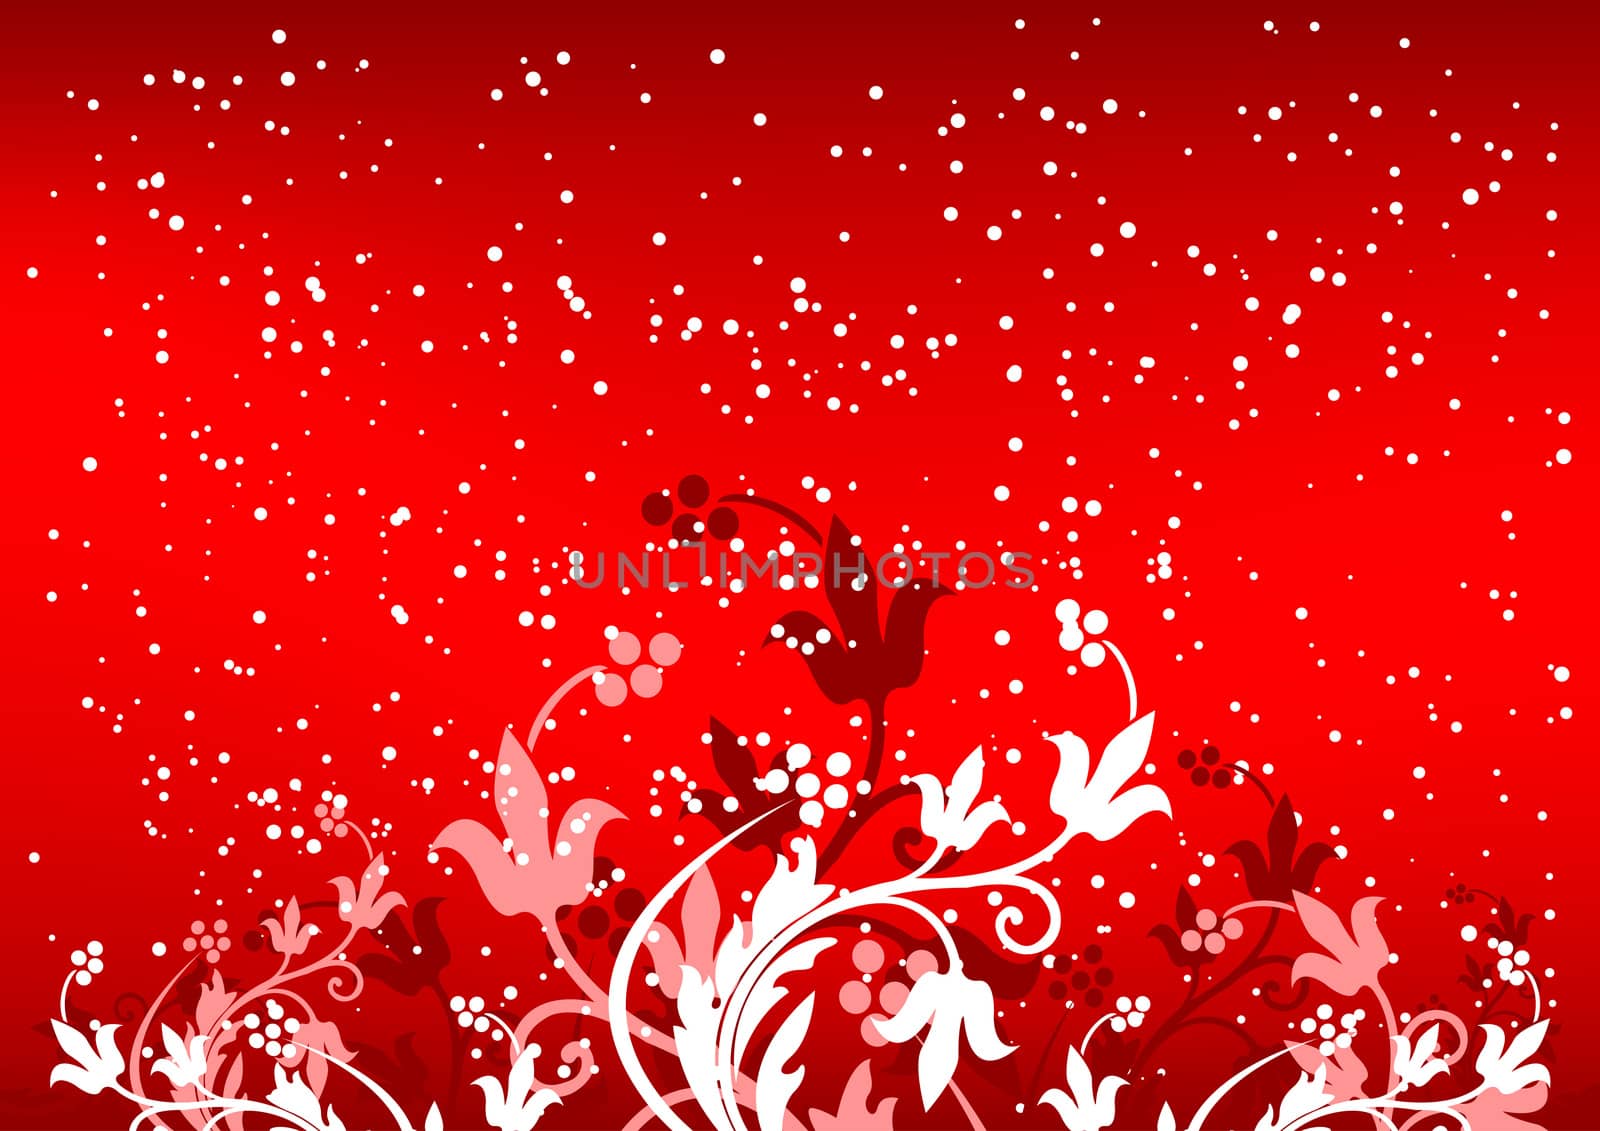 Abstract winterbackground with flakes and flowers in red color by WaD